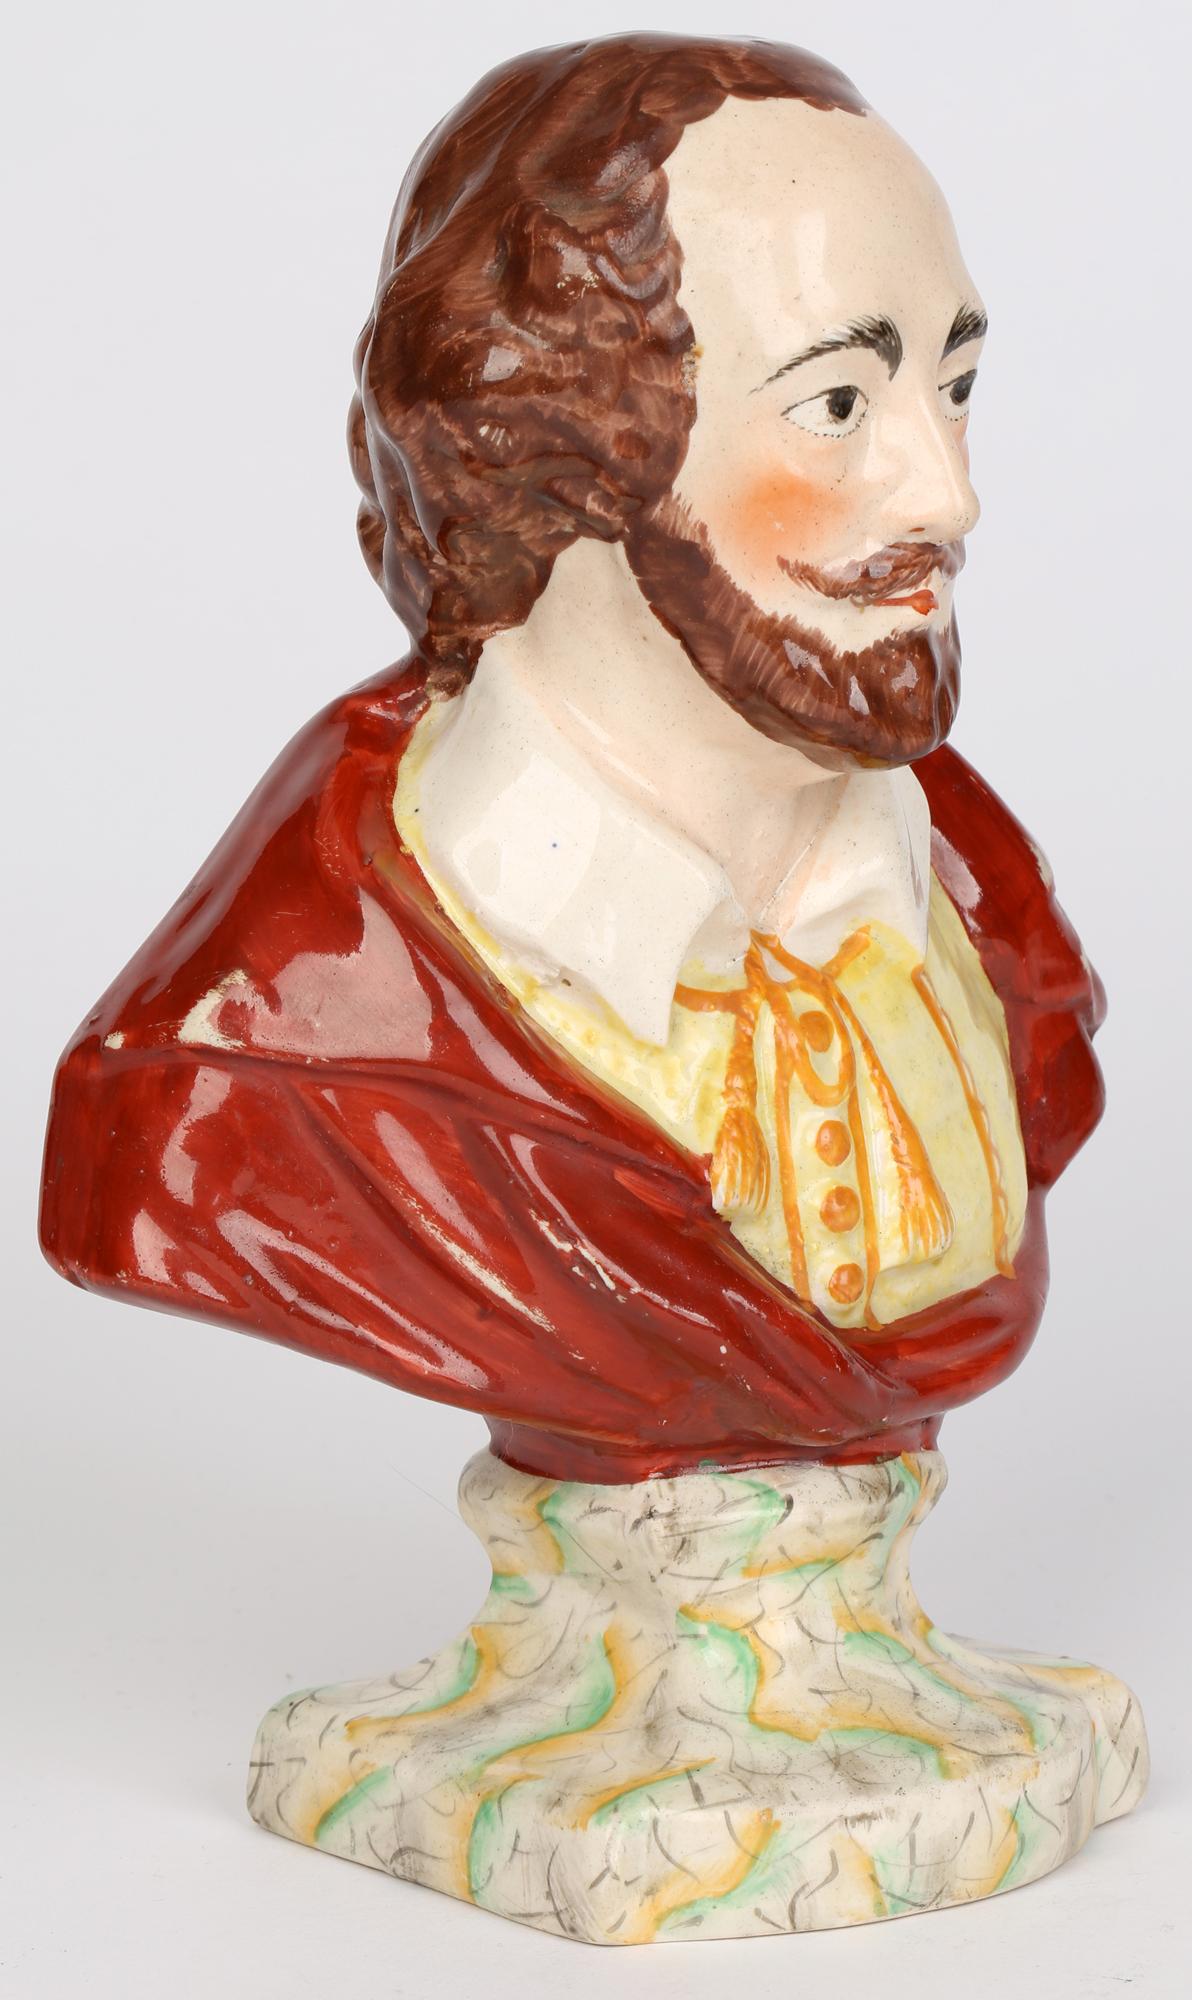 Early 19th Century English, Probably Leeds Hand Painted Pottery Bust of William Shakespeare